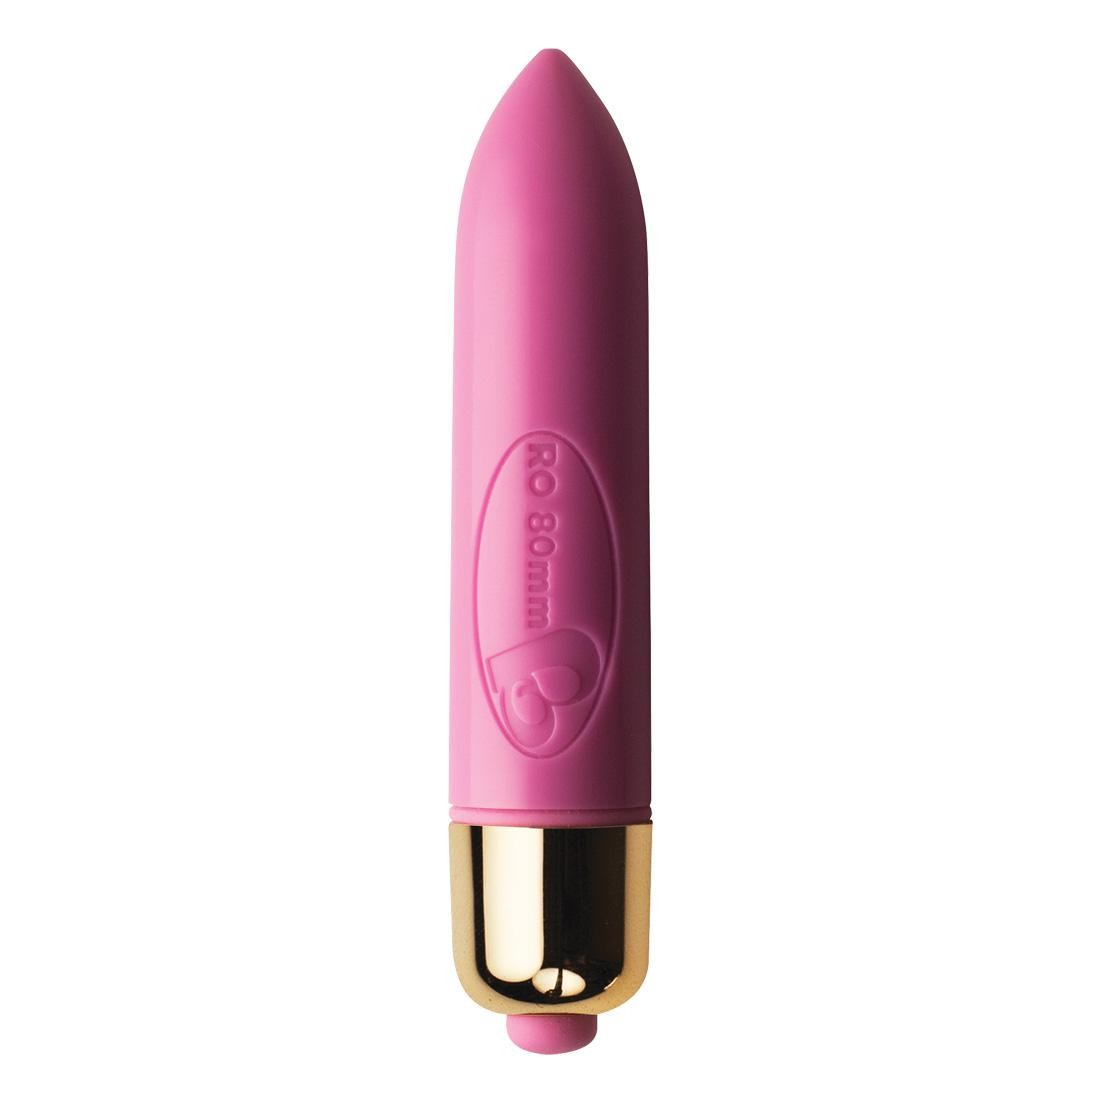  Rocks  Off  -  Carded  7  Speed  Pink  -  Vibrator 